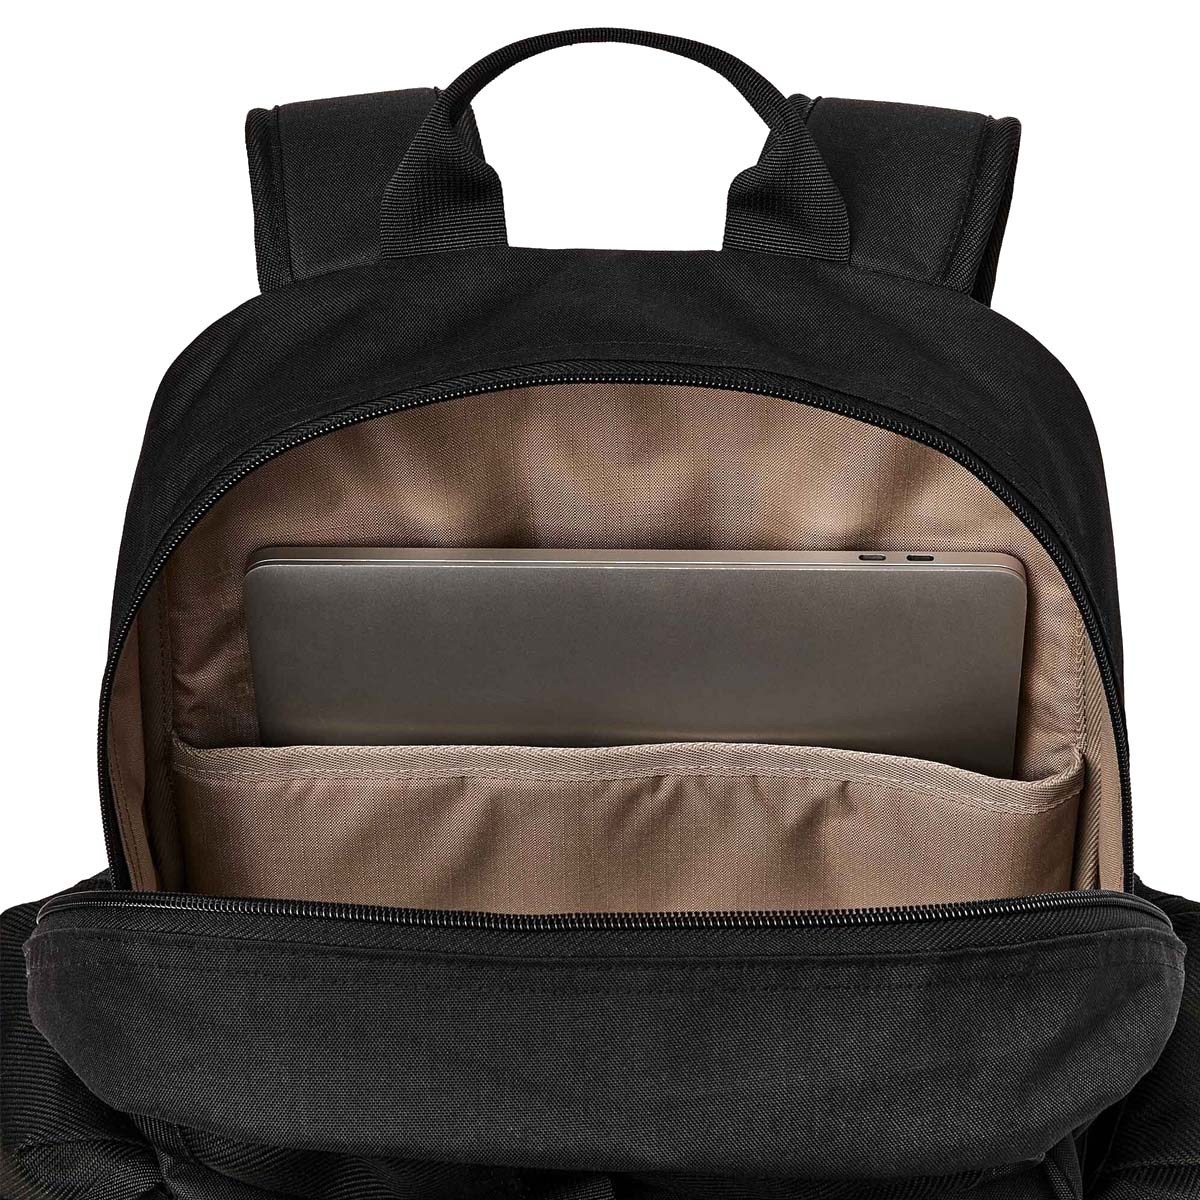 Filson Surveyor 36L Backpack Black, features a padded laptop compartment